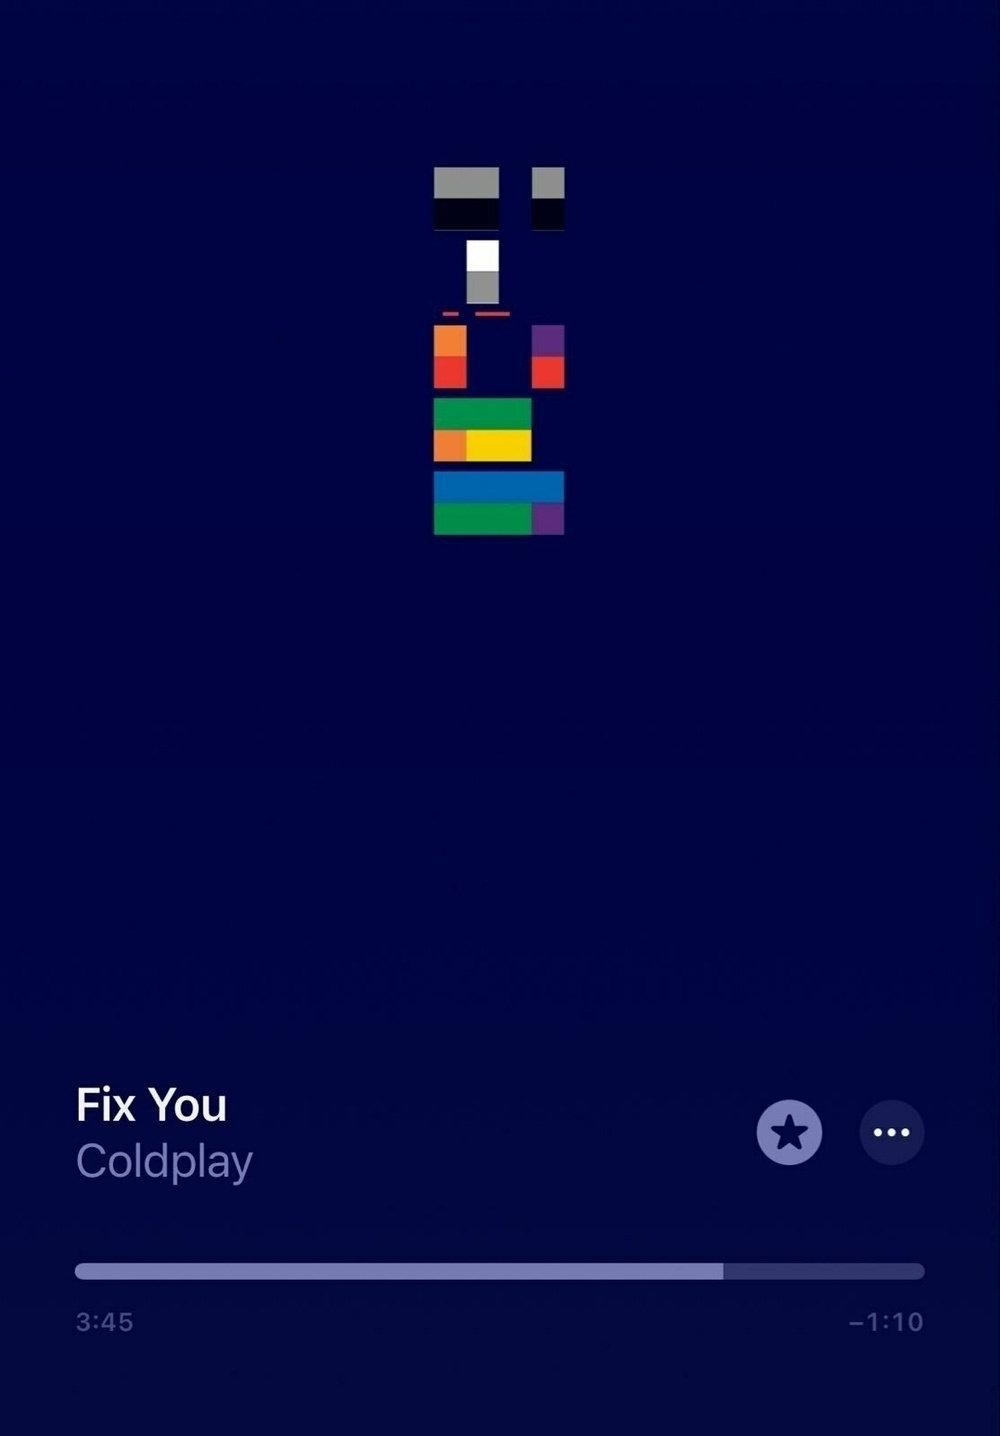 Screenshot of Fix You by Coldplay playing on my phone